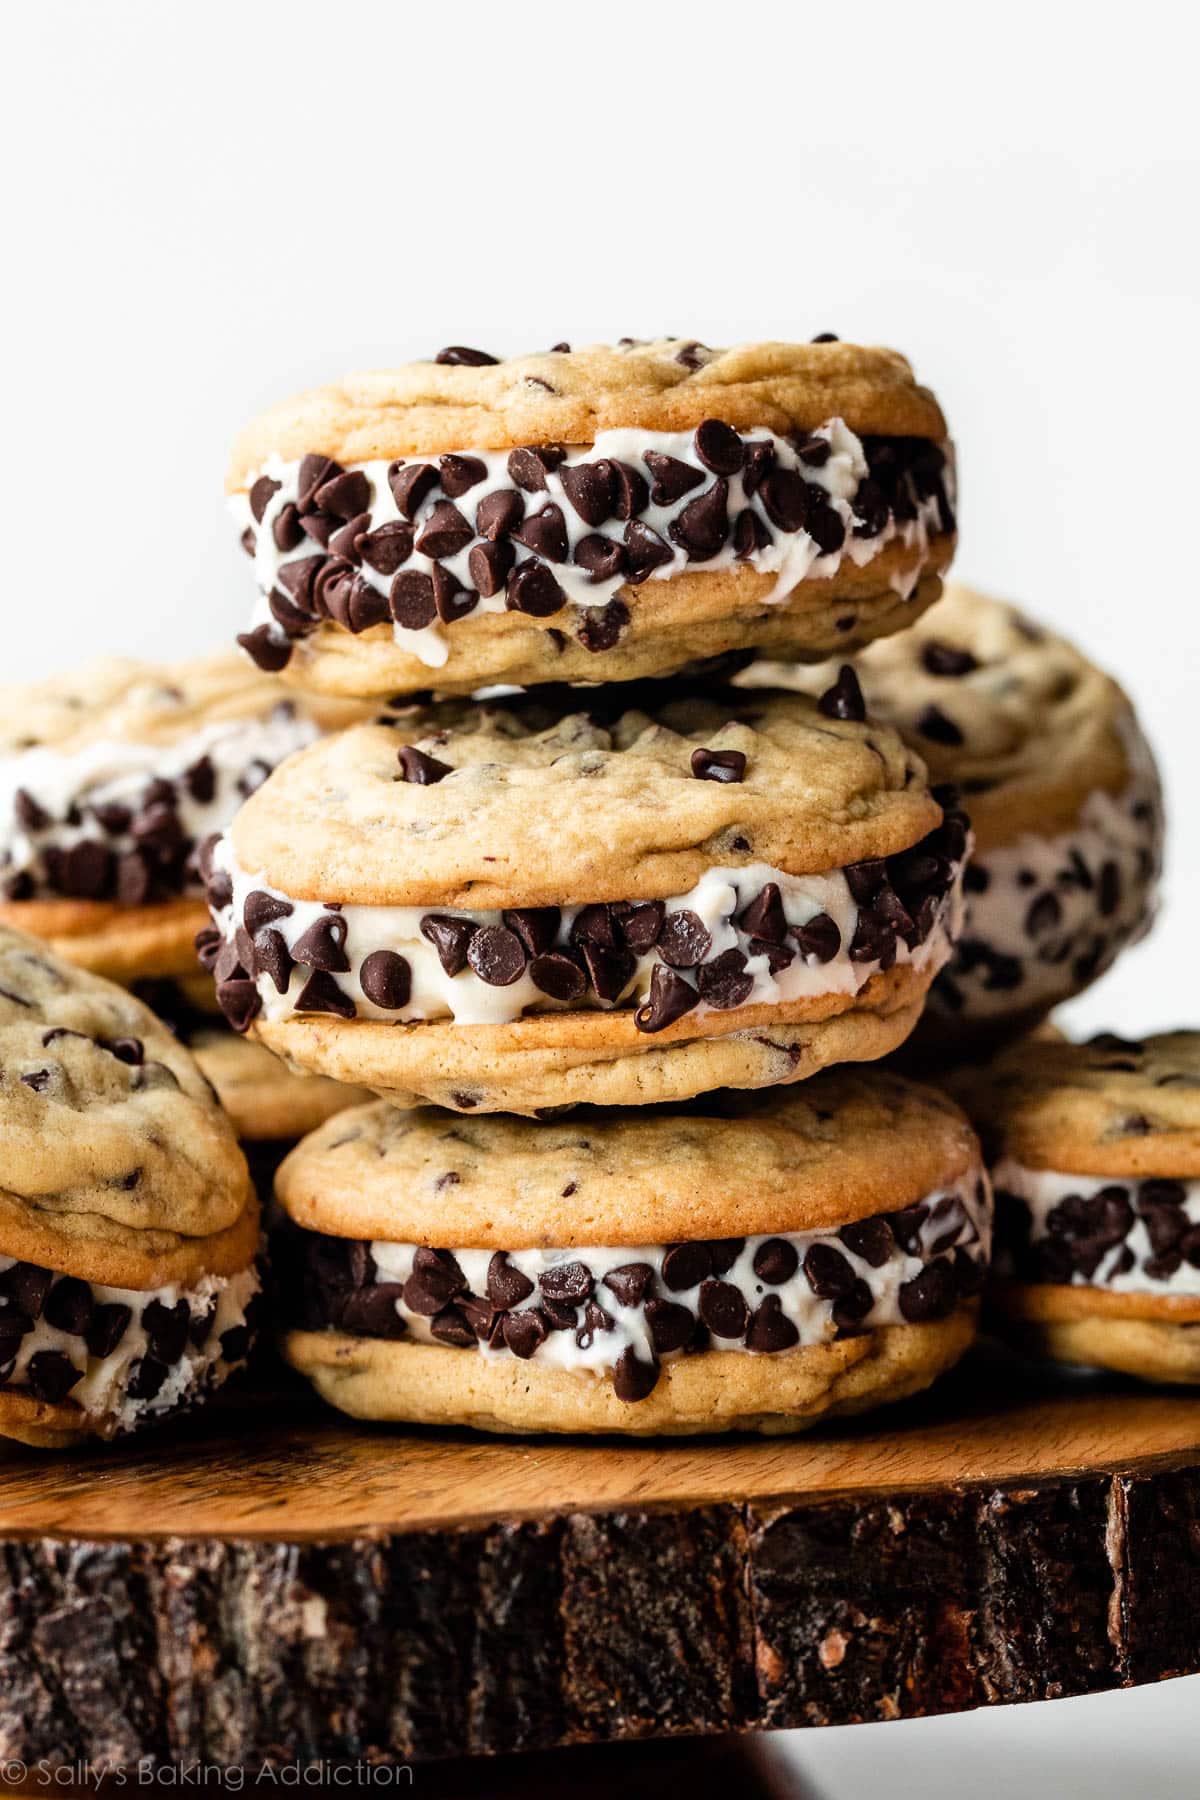 Cookie Ice Cream Sandwiches Like a Chipwich